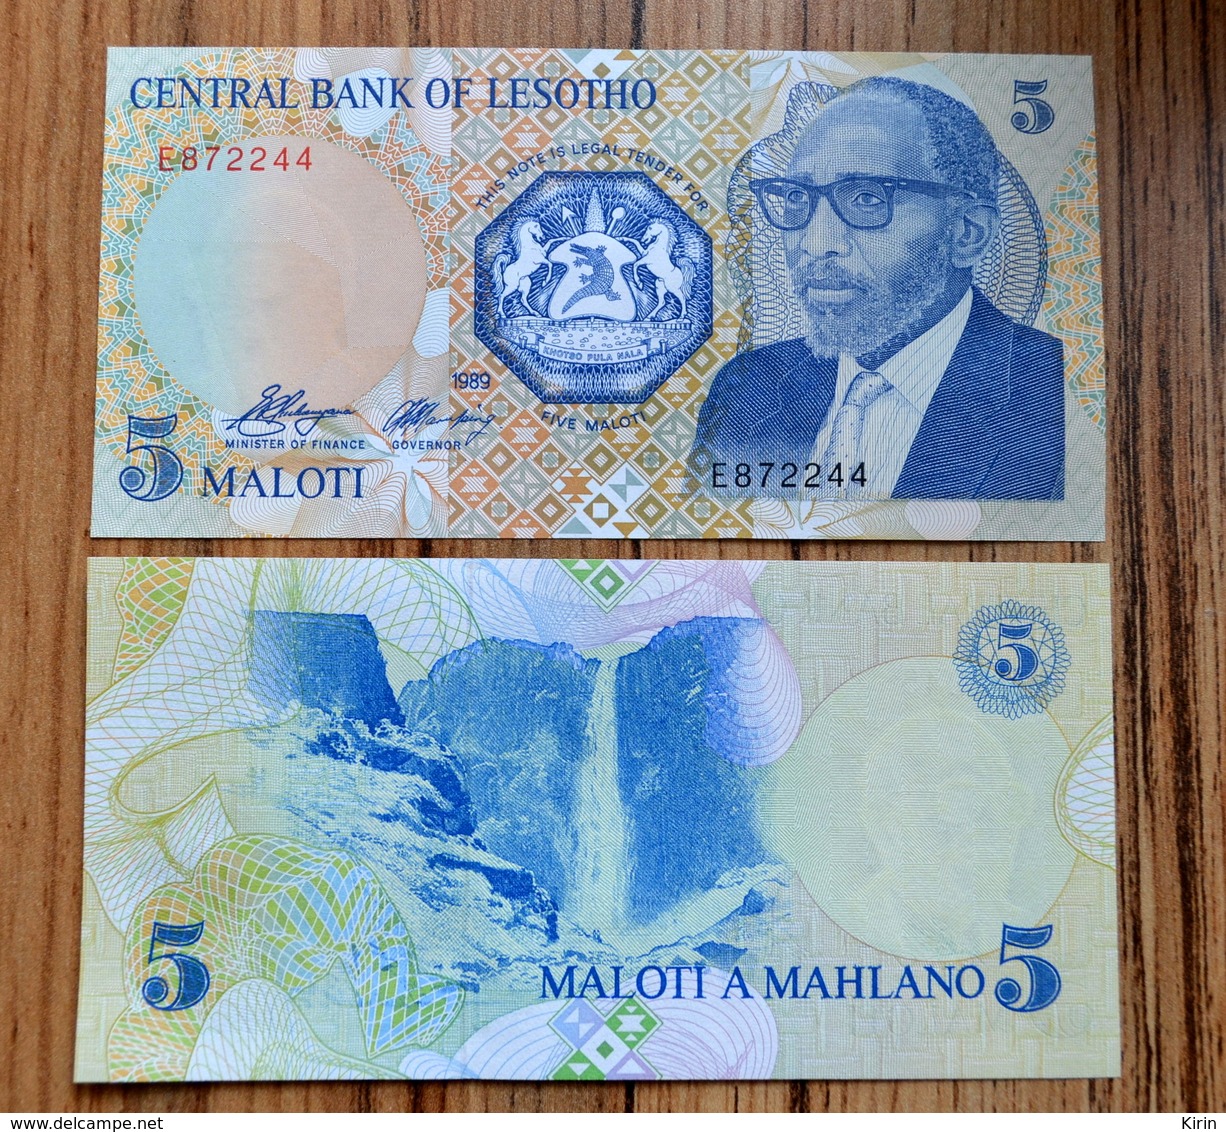 LESOTHO 5 Maloti 1989 P-10a UNC BANKNOTE PAPER MONEY CURRENCY AFRIKA - Lesotho